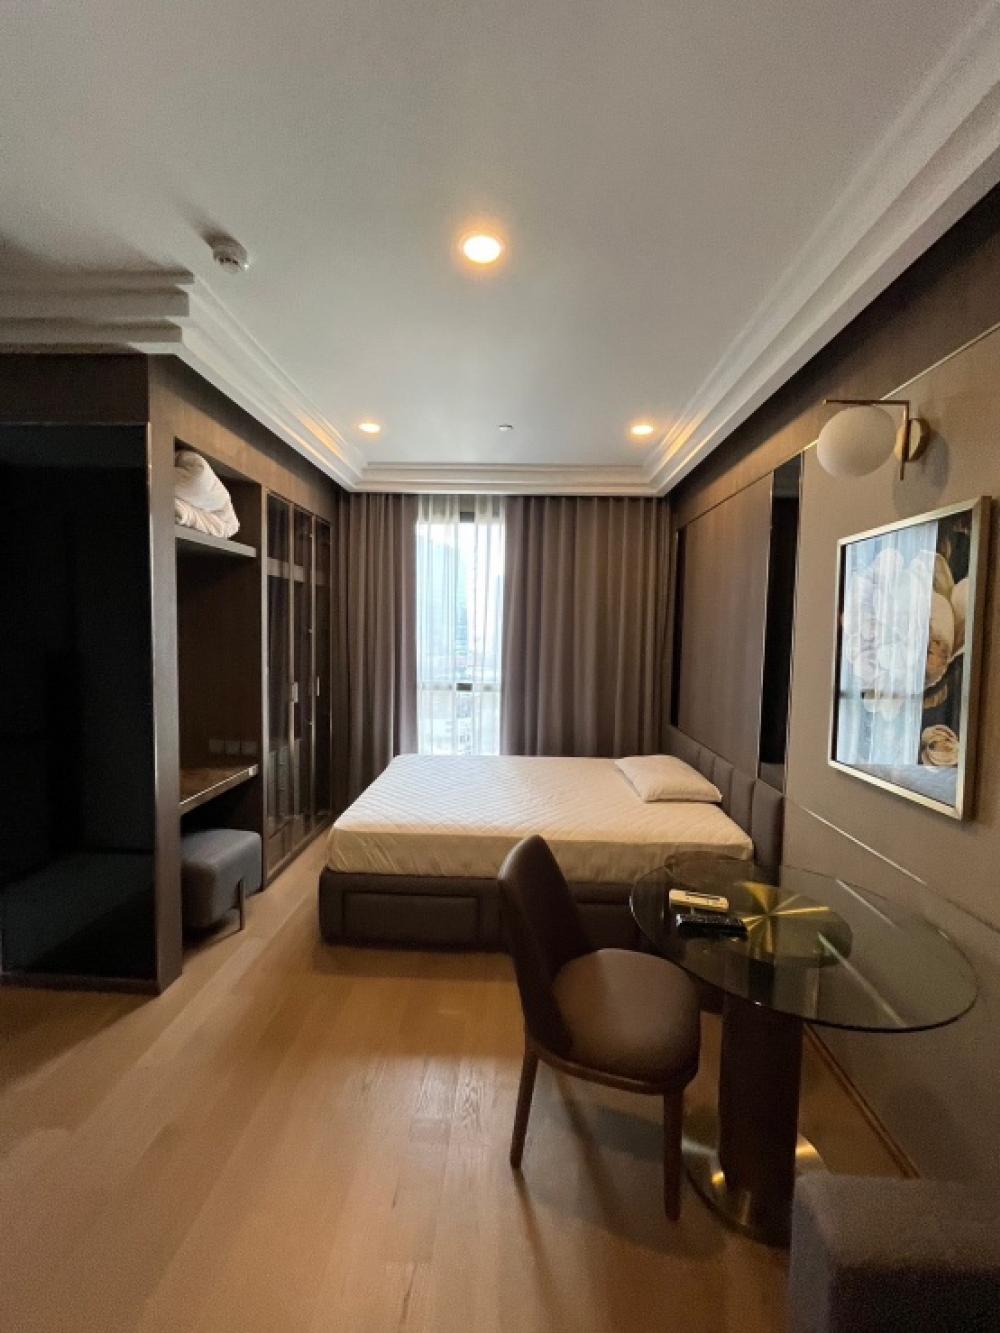 For RentCondoSiam Paragon ,Chulalongkorn,Samyan : Ashton Chula Silom, size 24 sq m, Studio room, but complete, ready to move in. Price 21000 baht. If interested, hurry up and make an appointment to visit 0614162636.